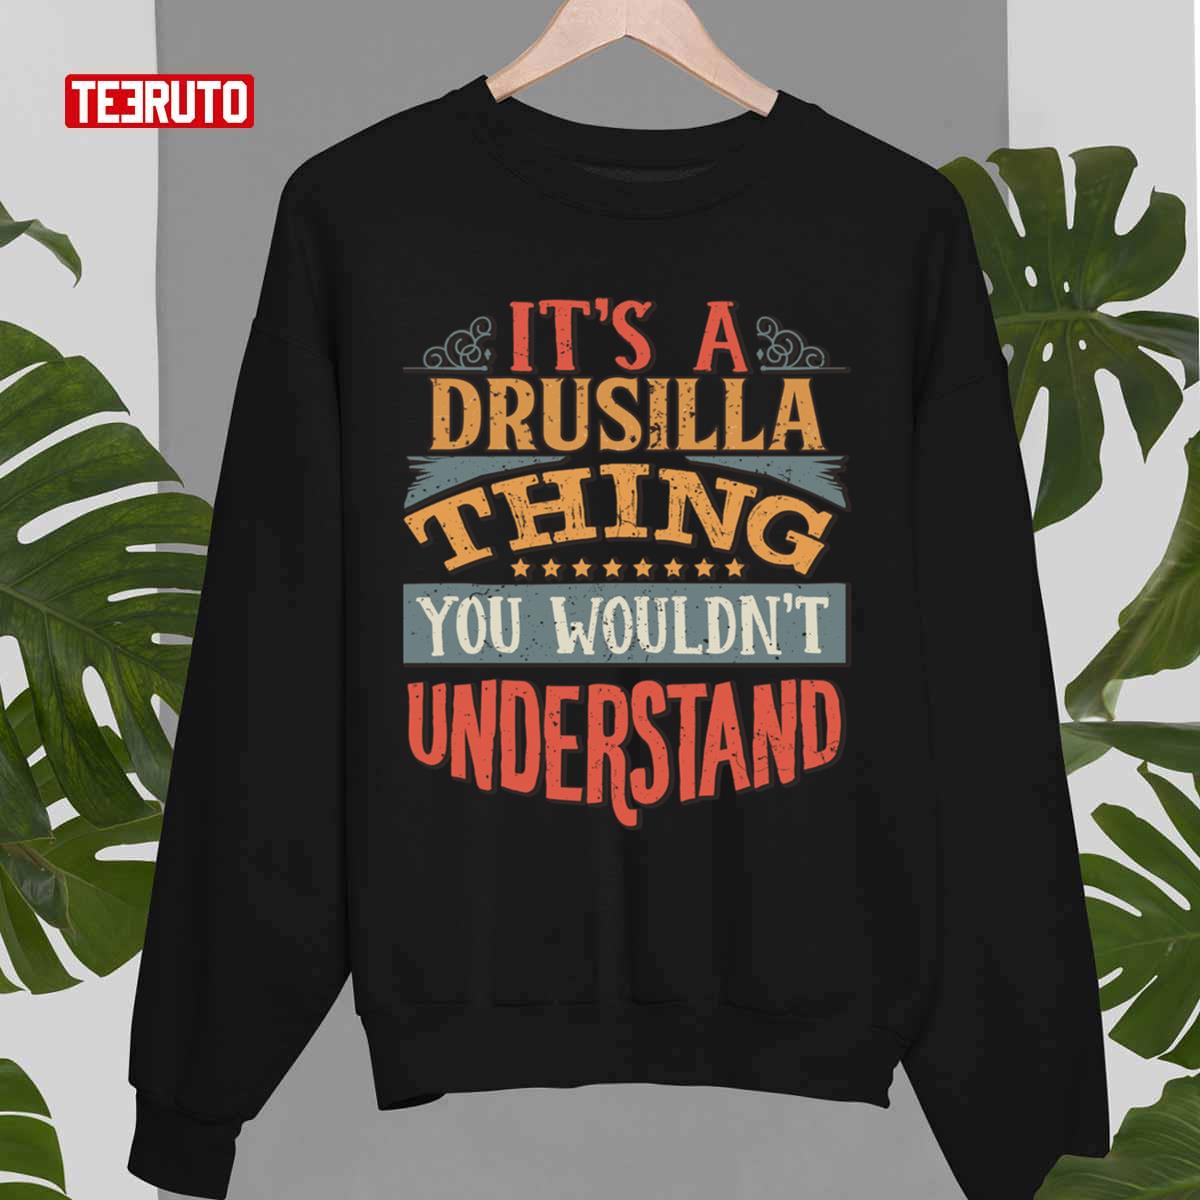 It’s A Drusilla Thing You Wouldn’t Understand Unisex T-Shirt